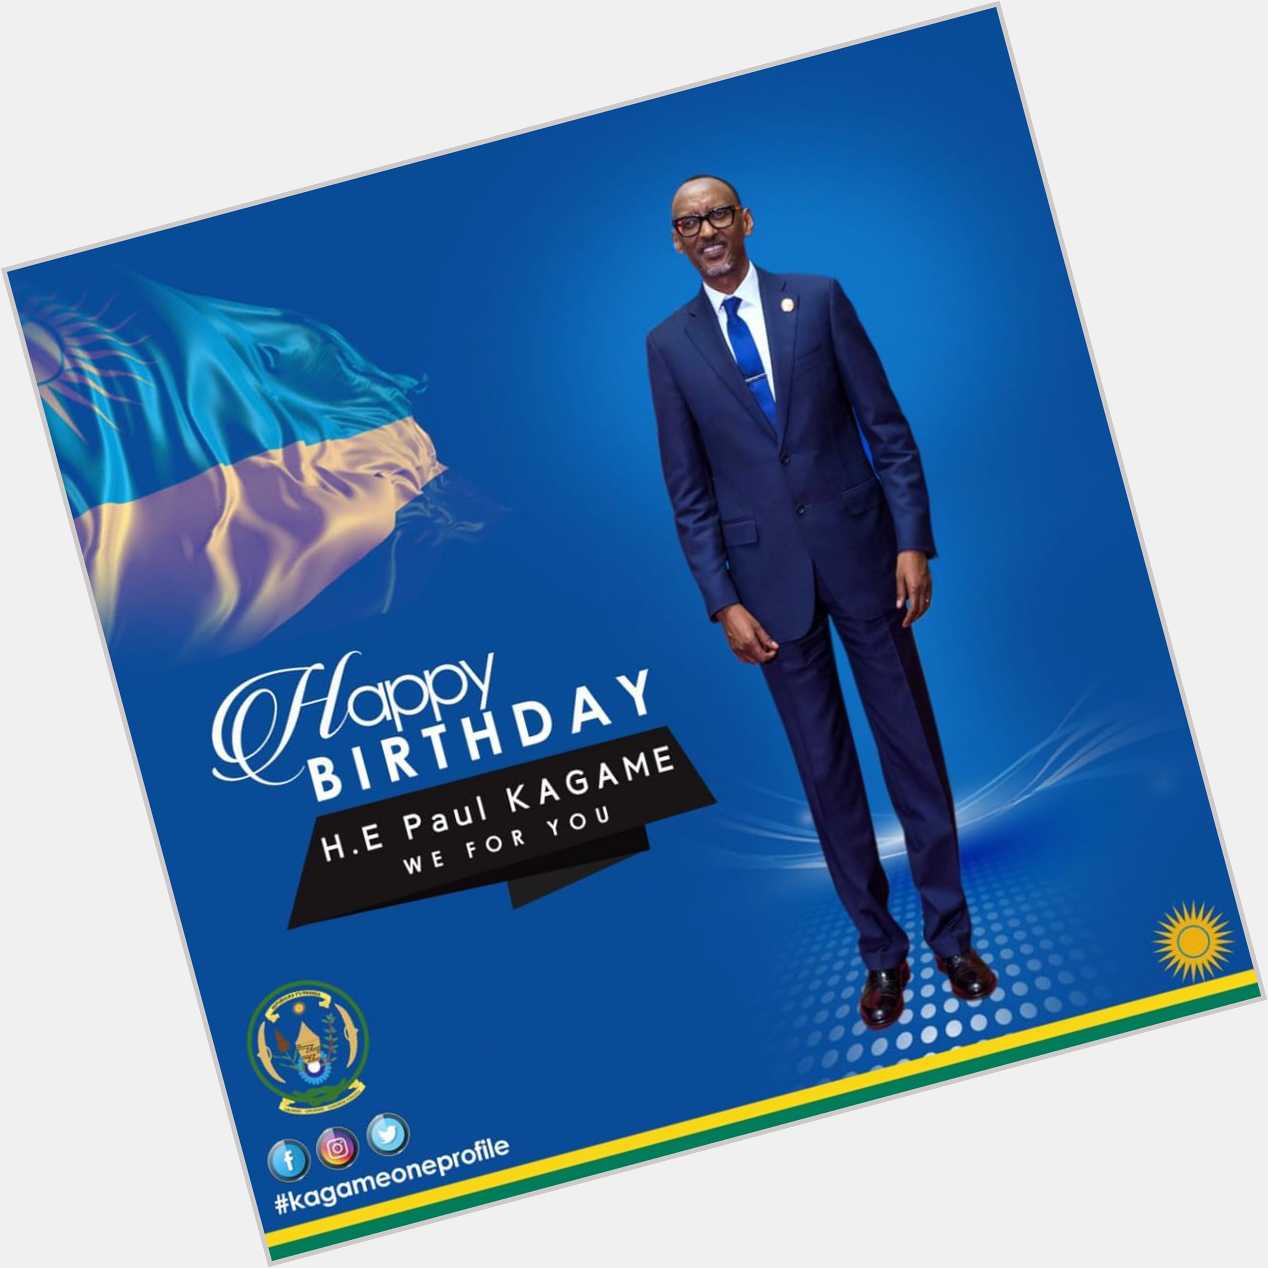 Happy birthday H.E Paul Kagame,the Man of his word!! 